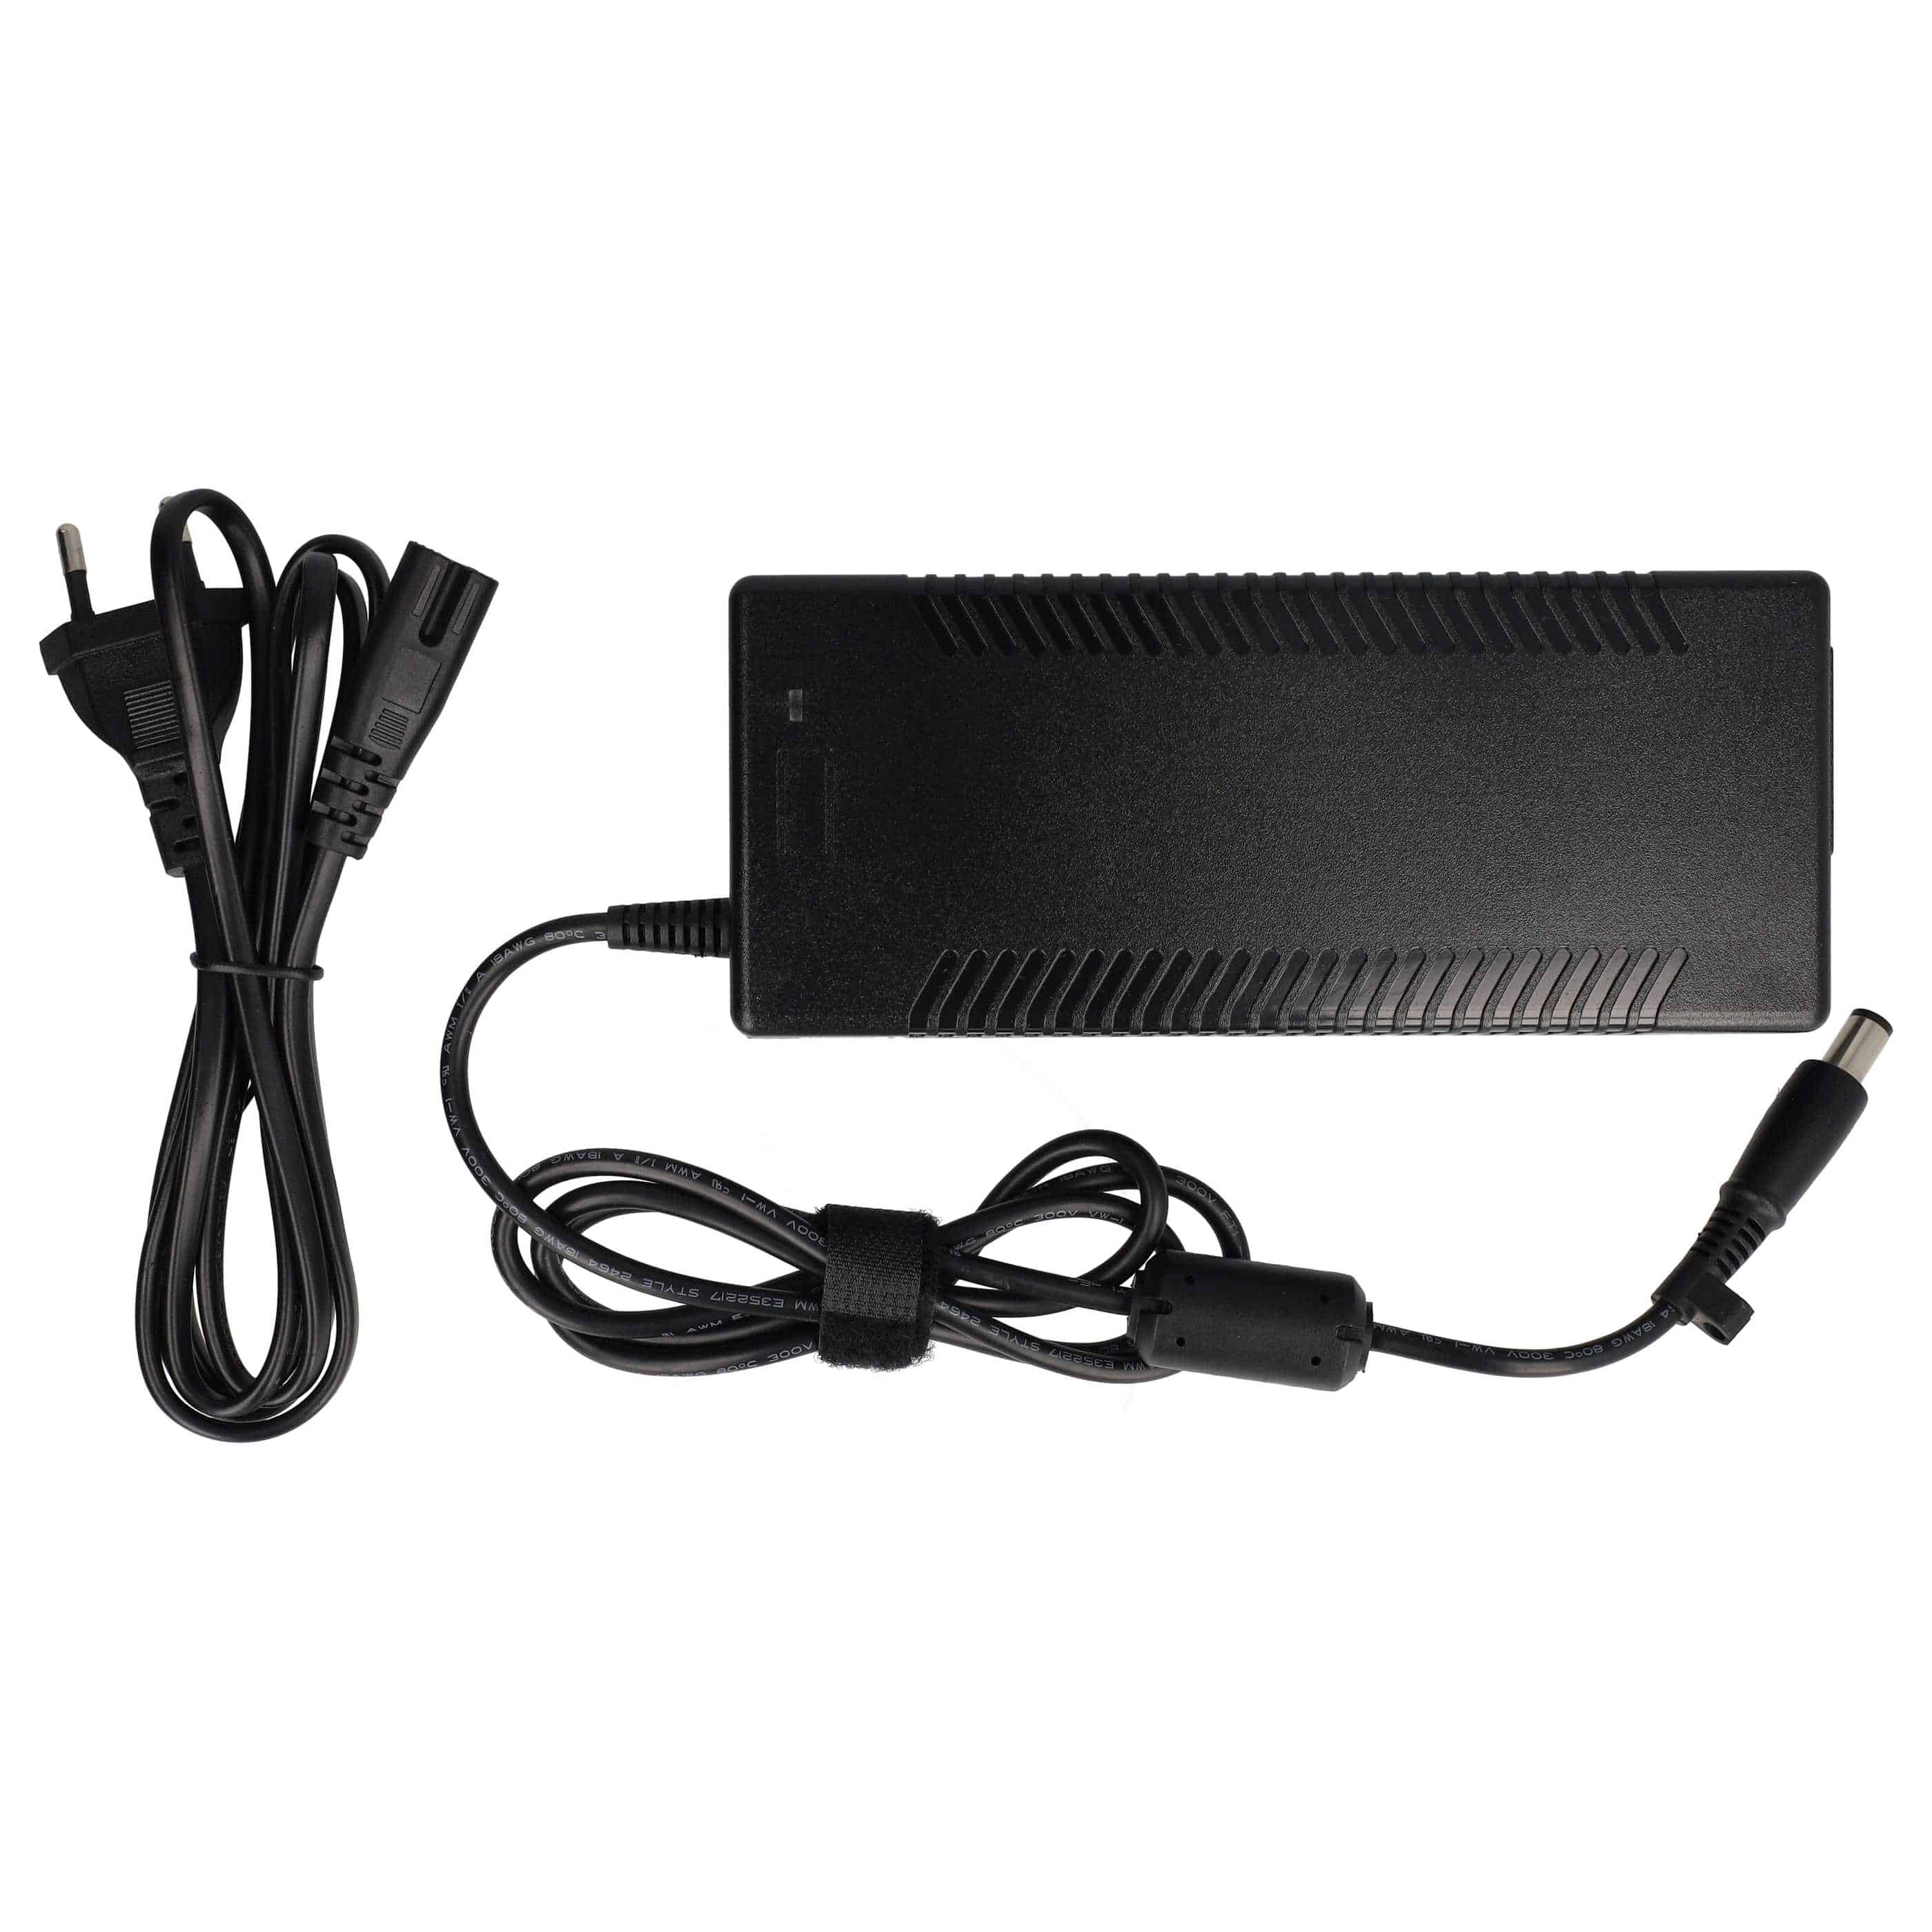 Mains Power Adapter replaces Dell PA-1131-02D for DellNotebook, 131 W